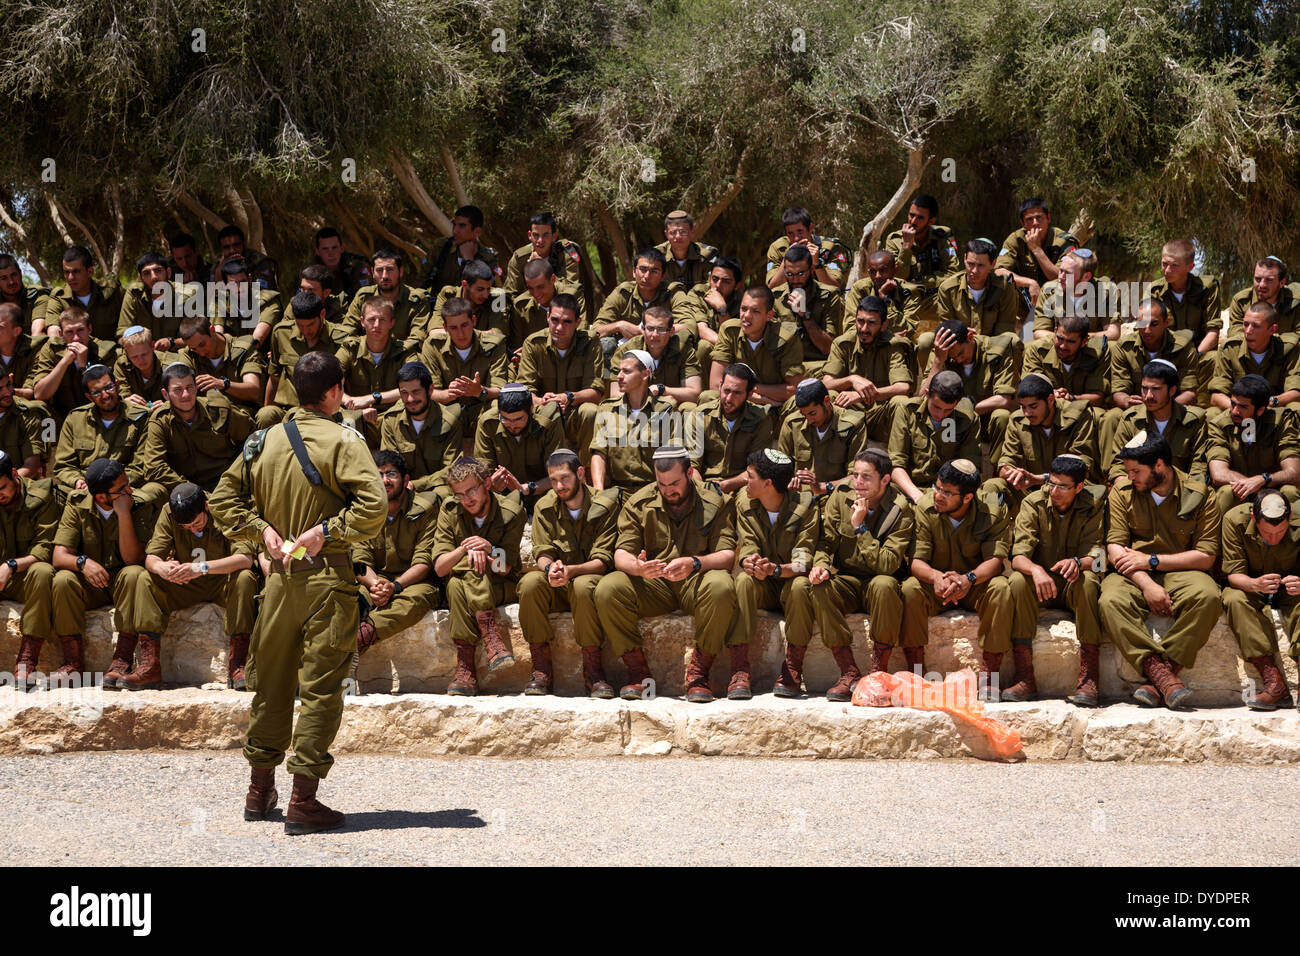 Soldiers by the grave site of David Ben Gurion in Sde Boker, Negev region, Israel. Stock Photo